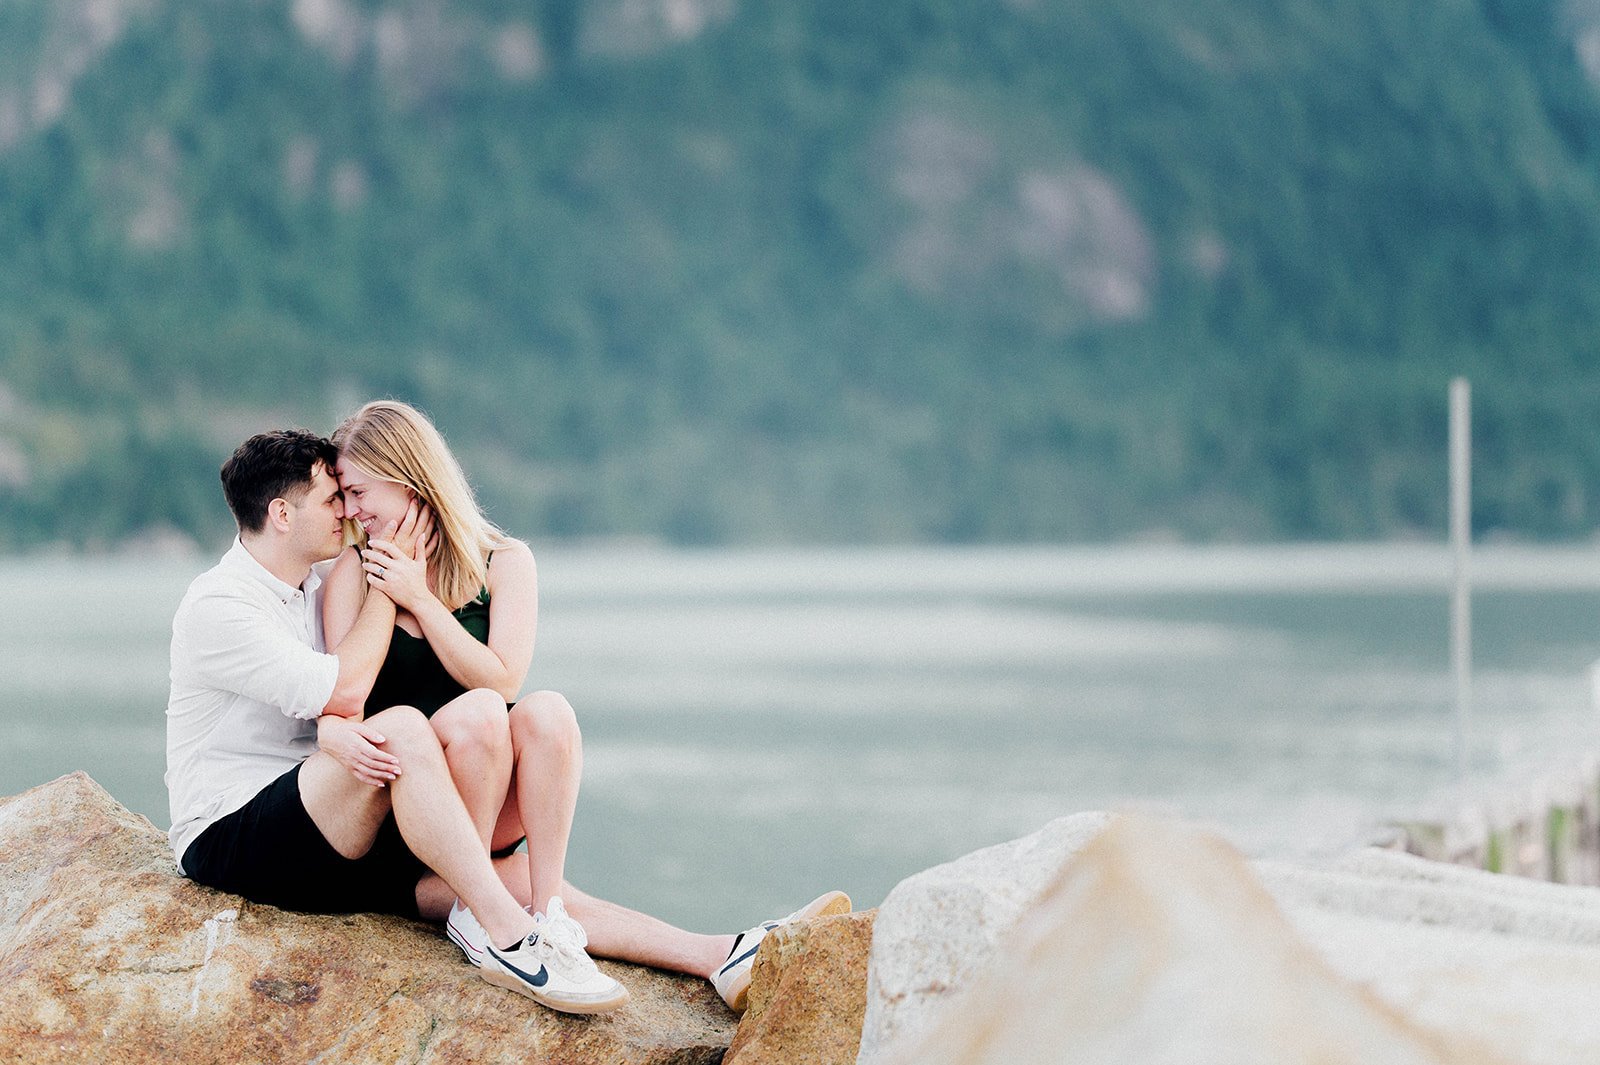 A blonde woman in a green dress sits on a man's lap in front of a beautiful green lake and mountain in Squamish, BC.